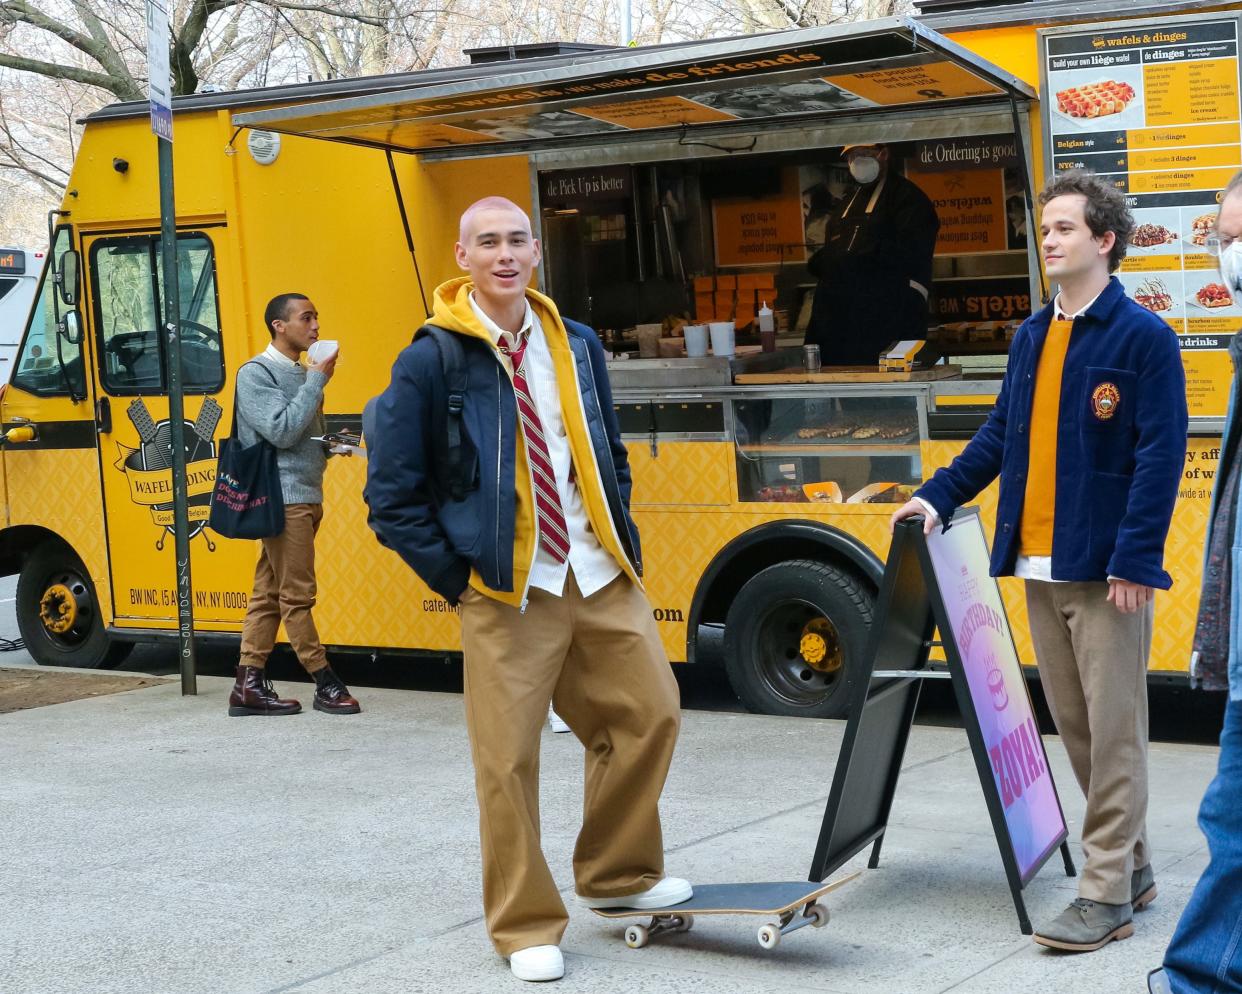 Evan Mock and Eli Brown are seen at the film set of the "Gossip Girl" TV series on March 15, 2021, in New York City.